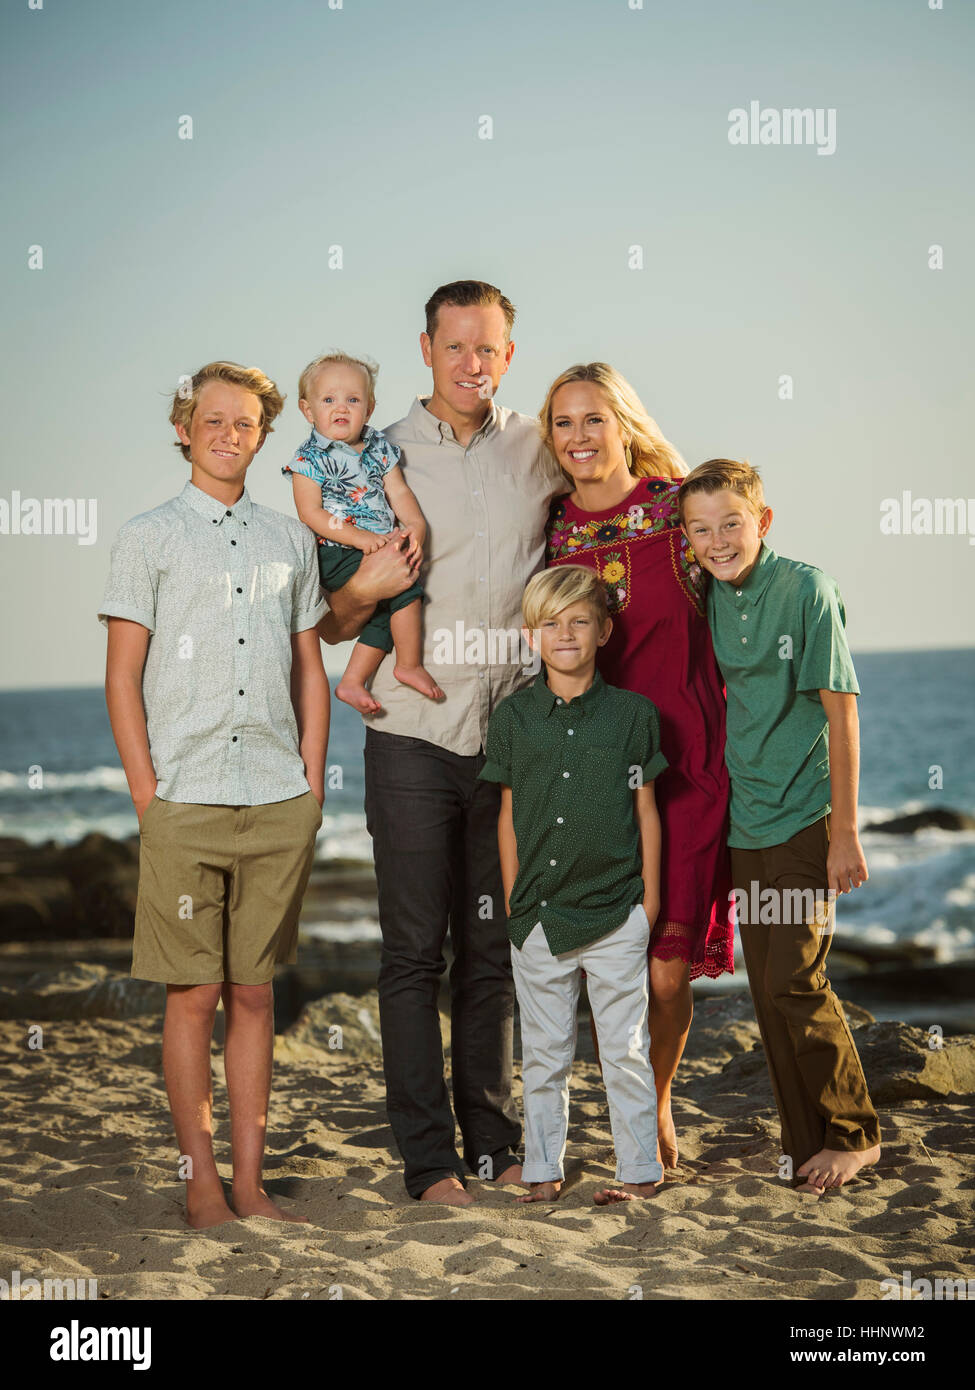 Caucasian family posing on beach Banque D'Images